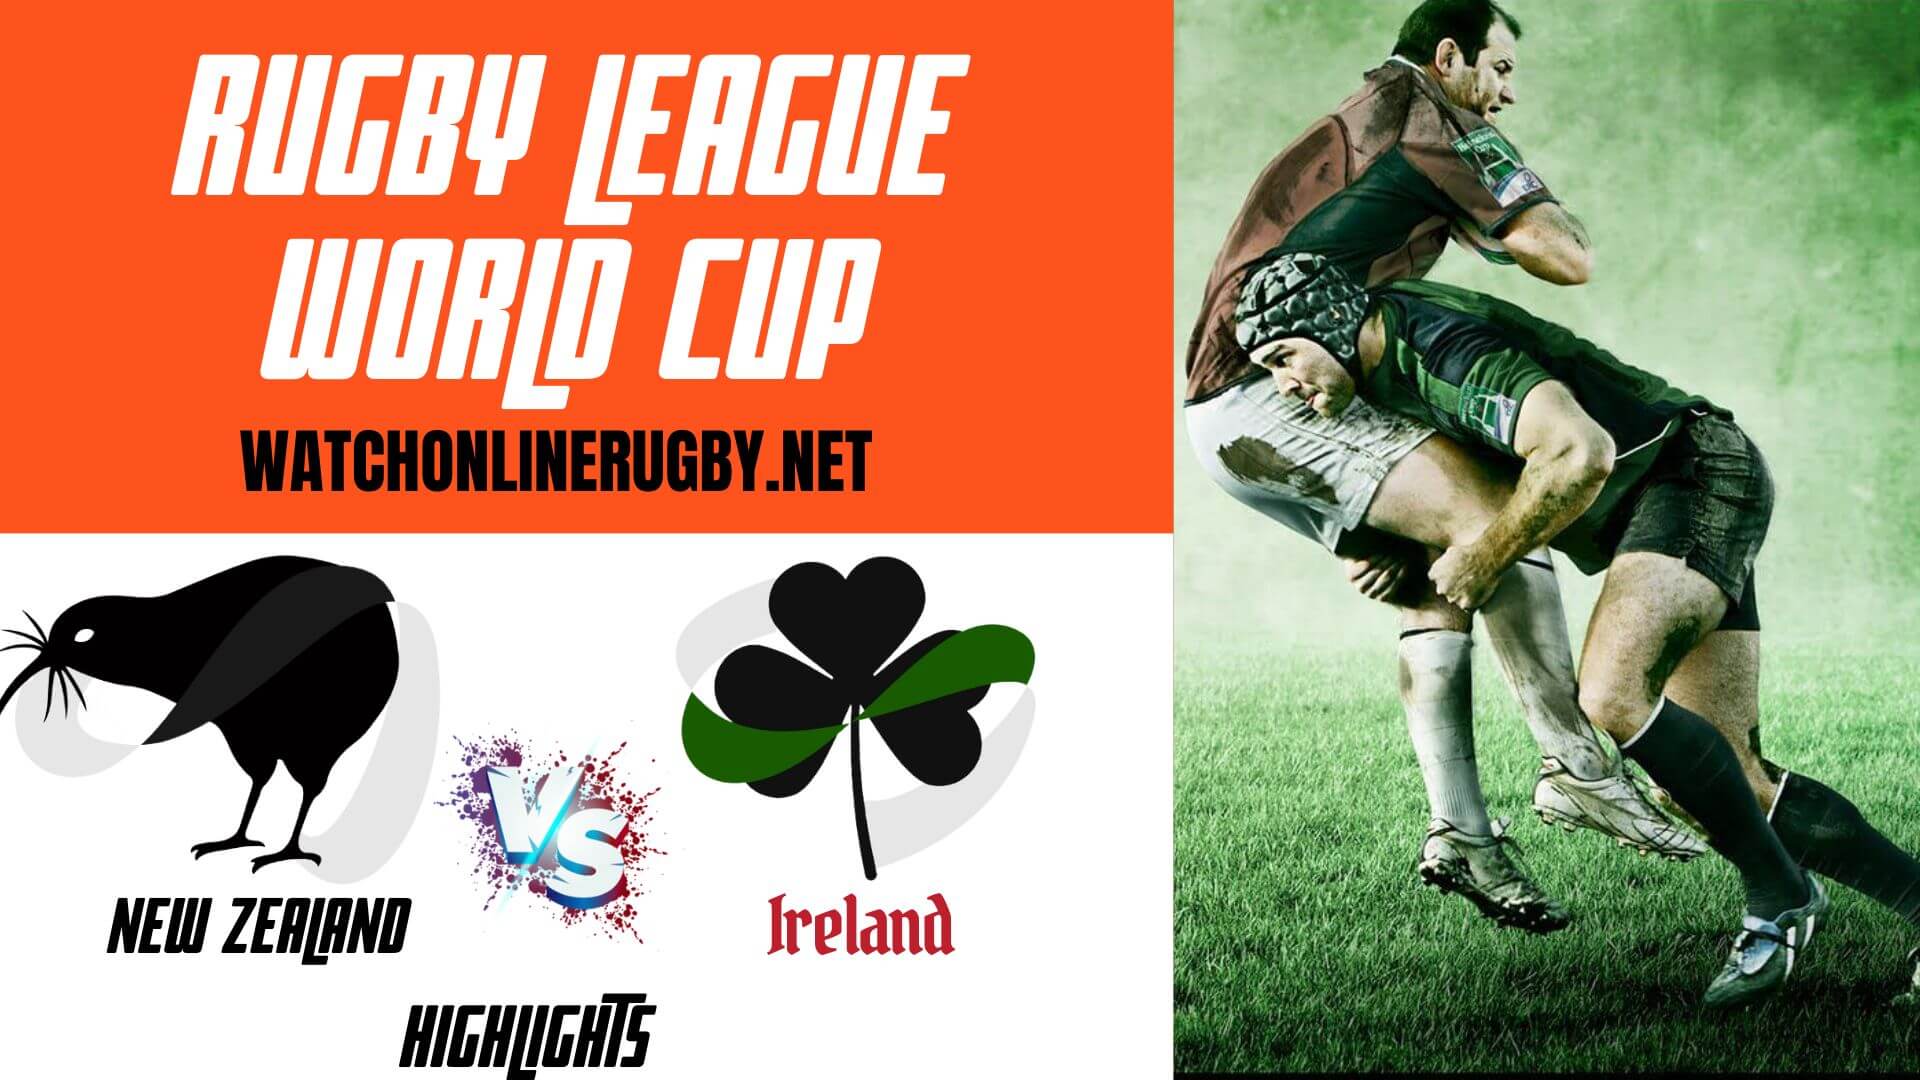 New Zealand Vs Ireland Rugby League World Cup 2022 RD 3